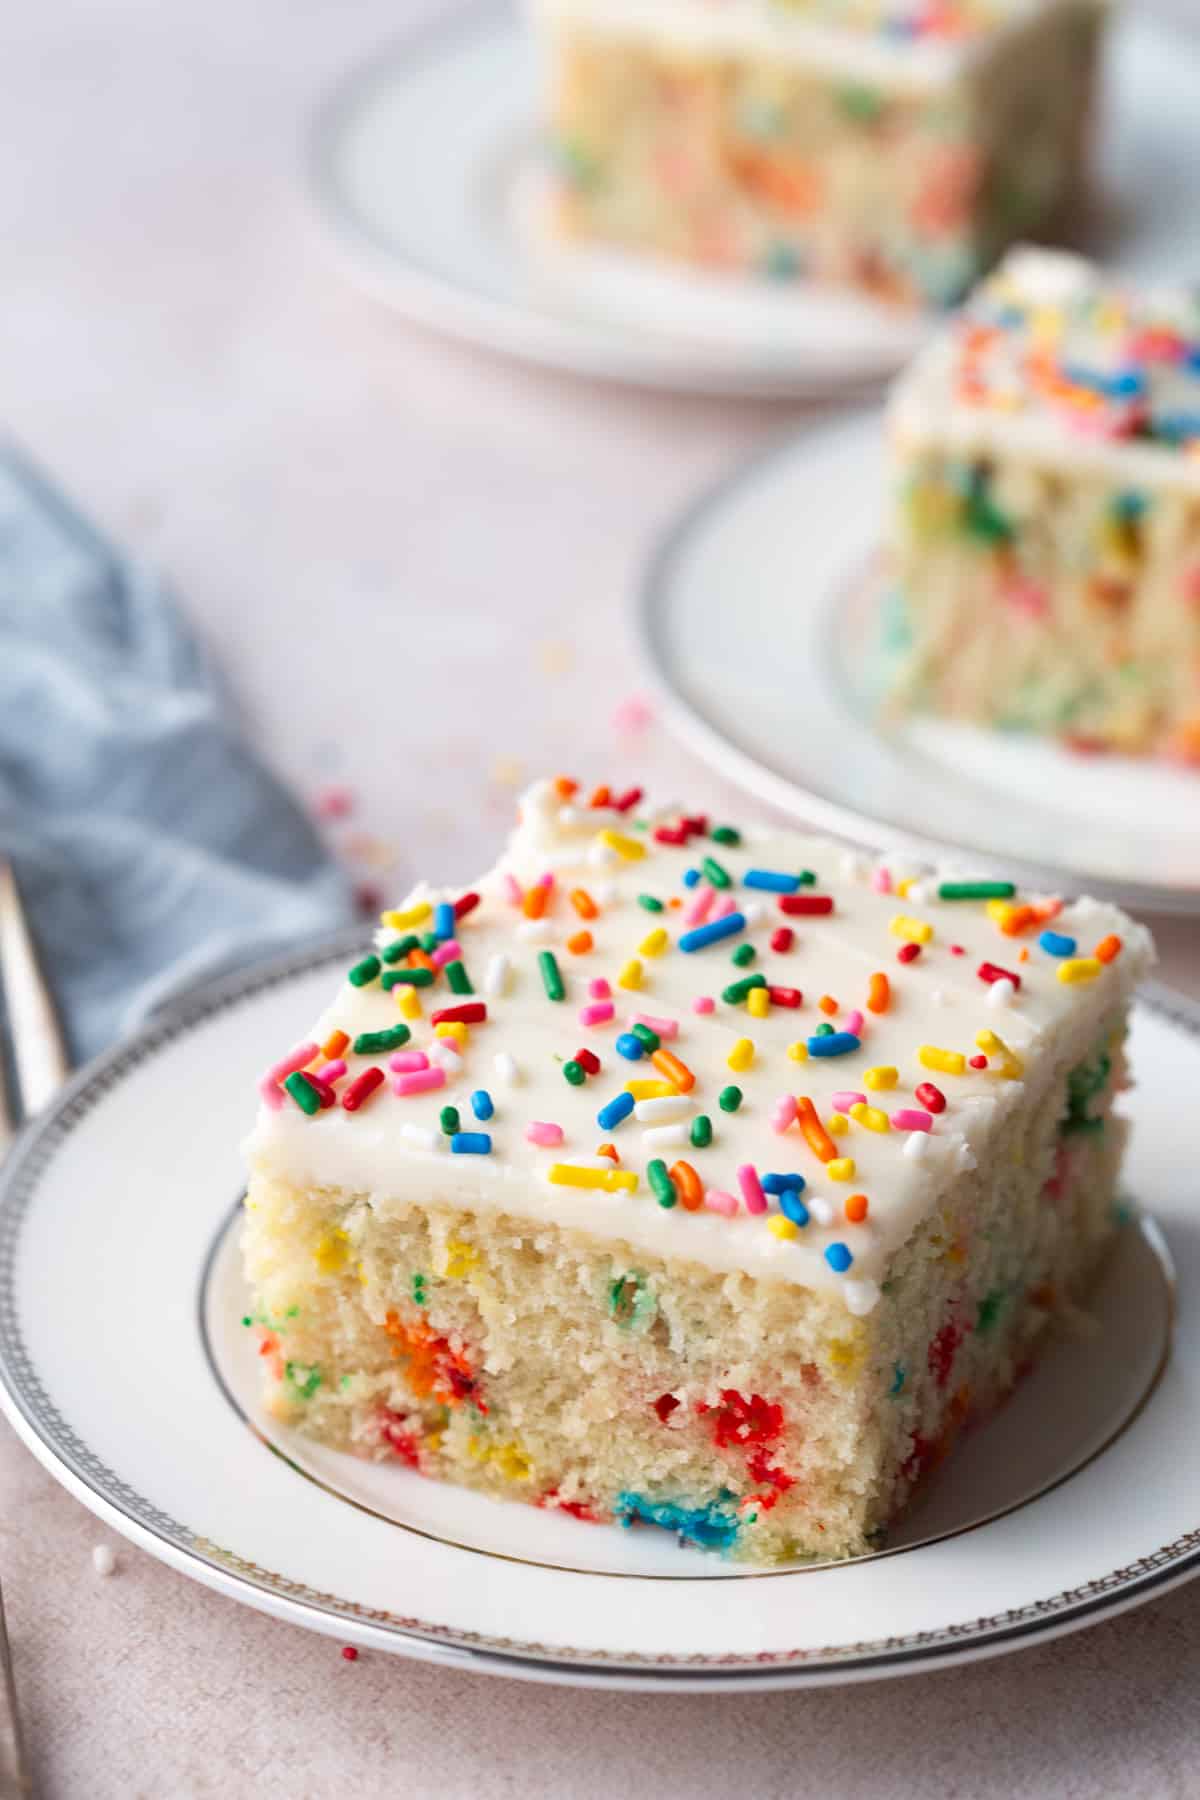 three pieces of vanilla wacky cake with sprinkles and frosting on white plates with a silver rim.